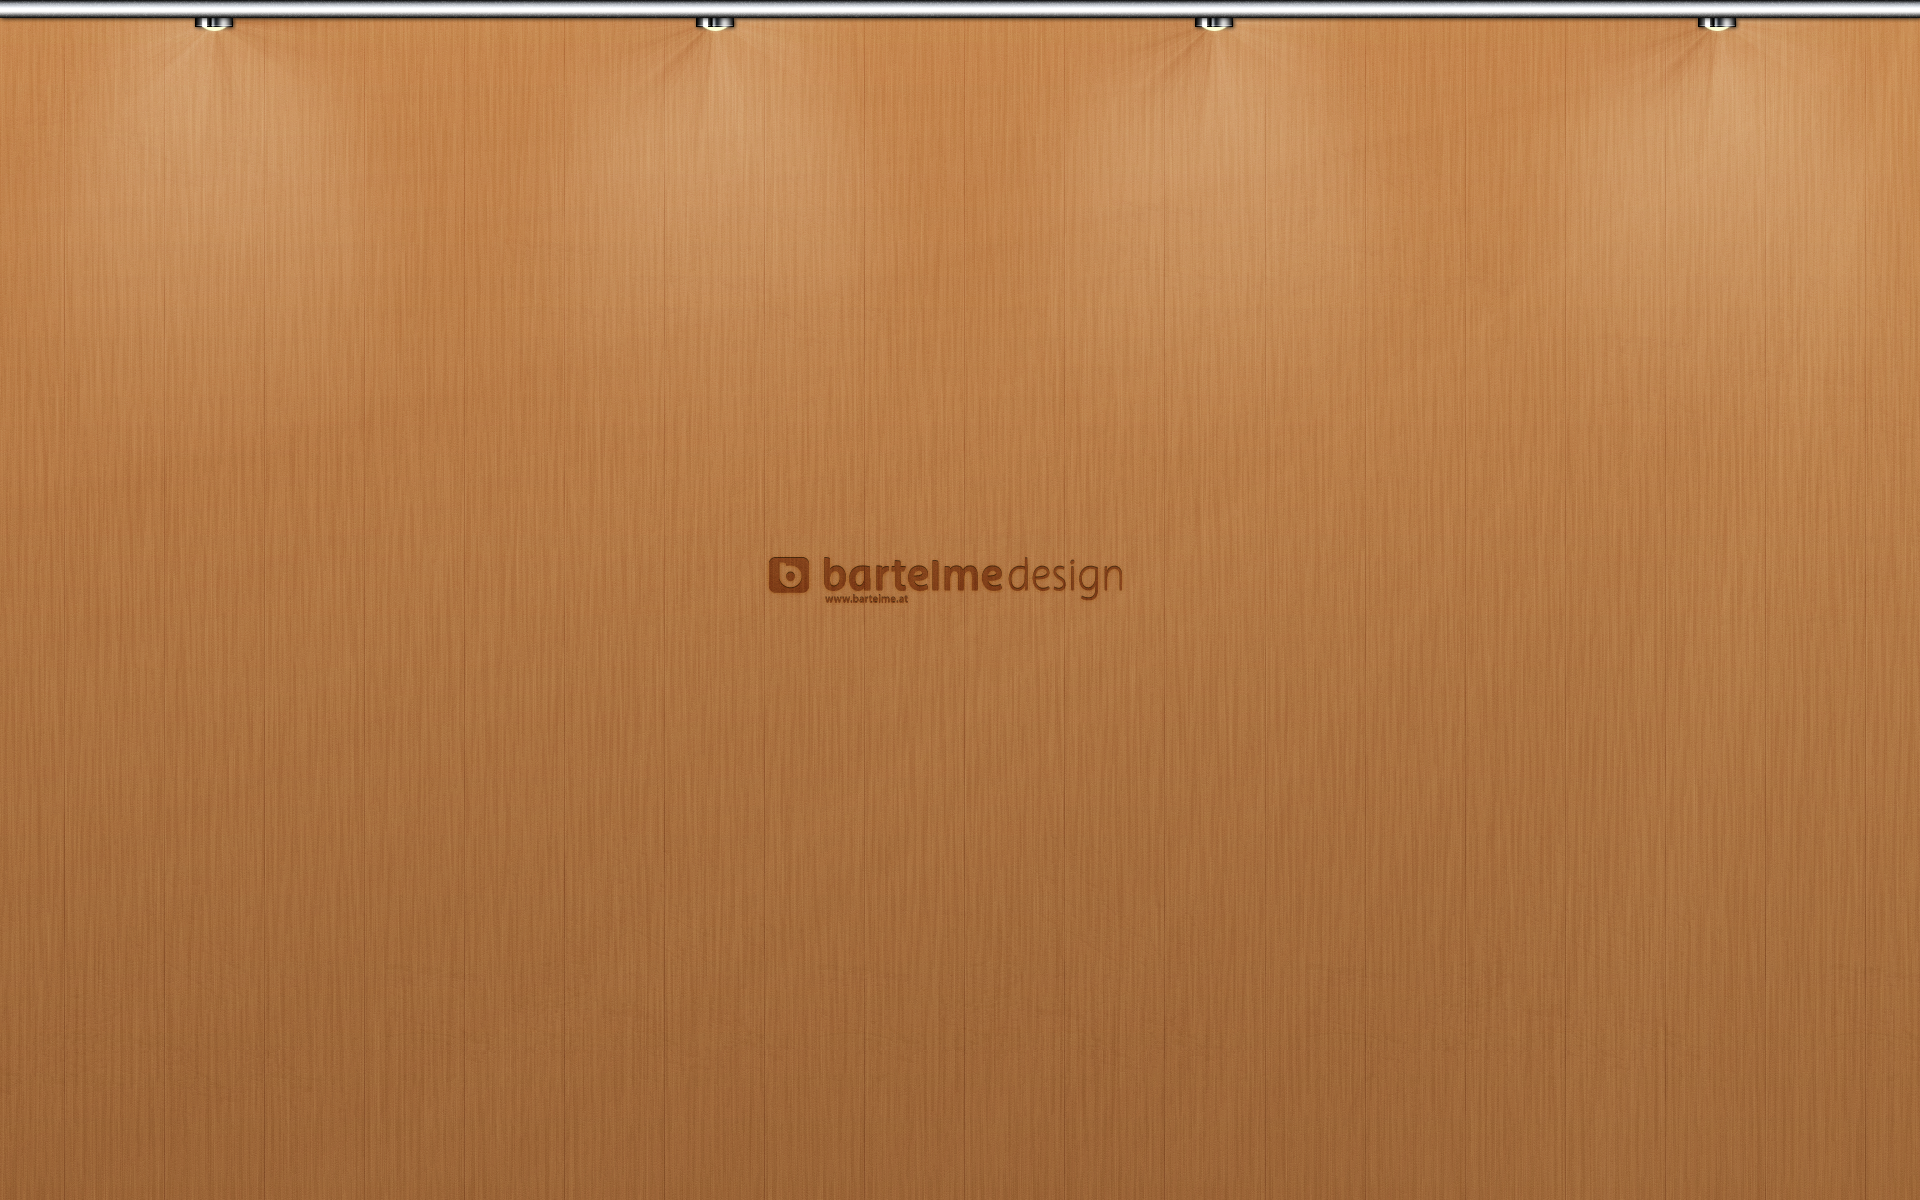 Btw if you're just interested in the official Bartelme Design wallpaper, 